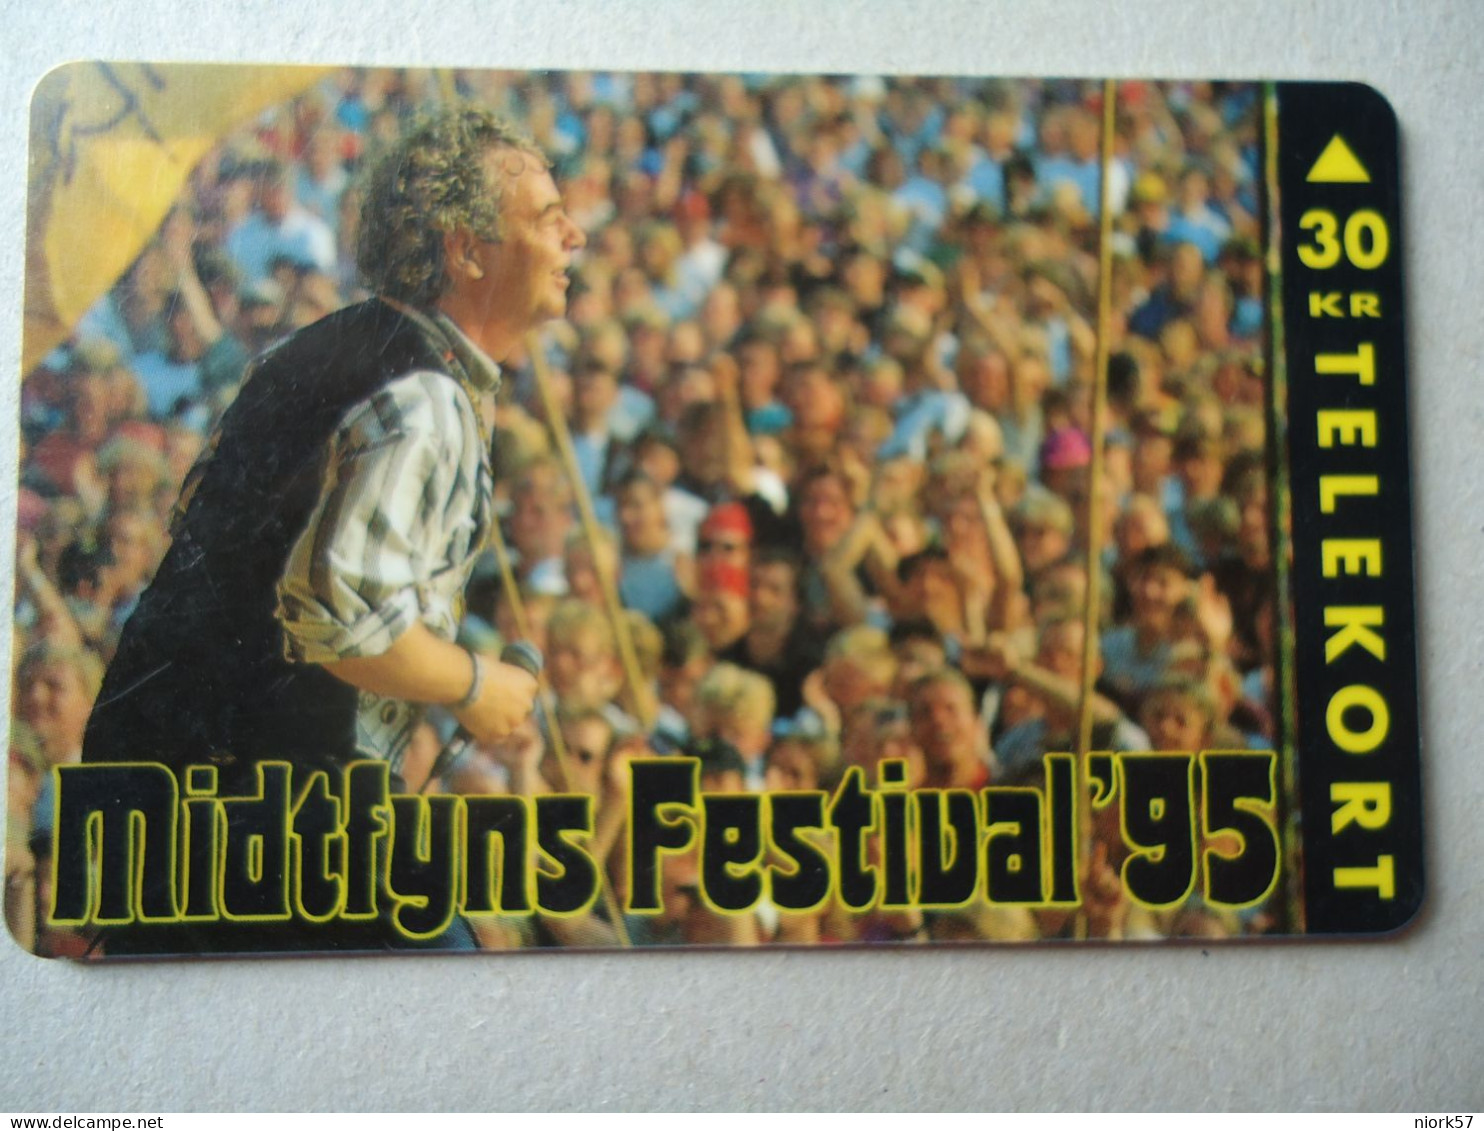 DENMARK  USED CARDS MUSIC MIDTFYNS FESTIVAL 95  IR 15.000 - Musique